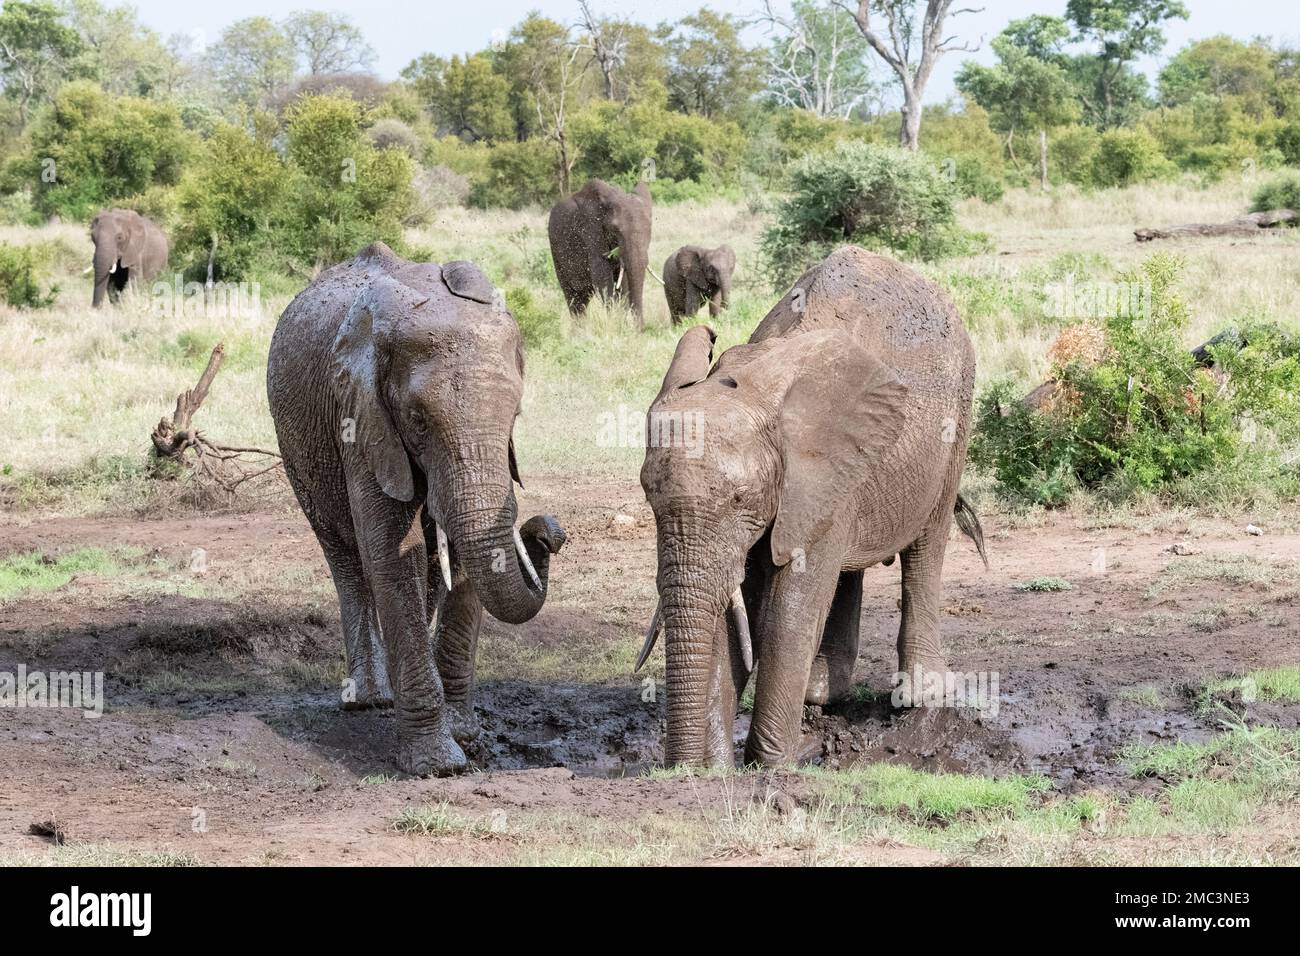 Two African elephants at a muddy waterhole in the savannah in the Kruger National Park, South Africa Stock Photo